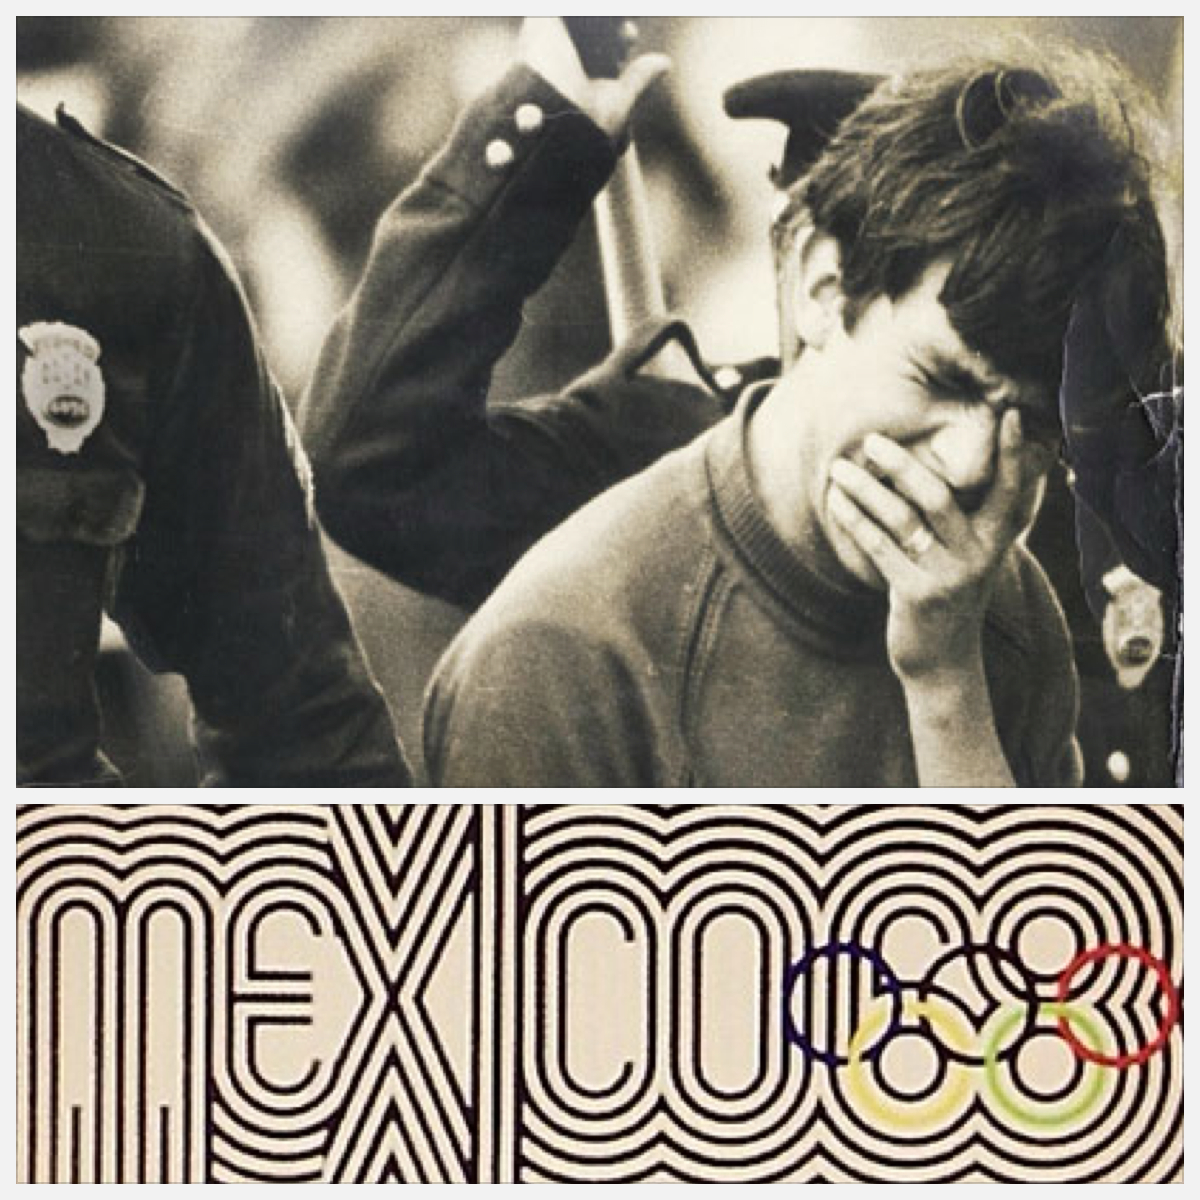 person covering facce with hand and symbol for 1968 Mexico City Olympics